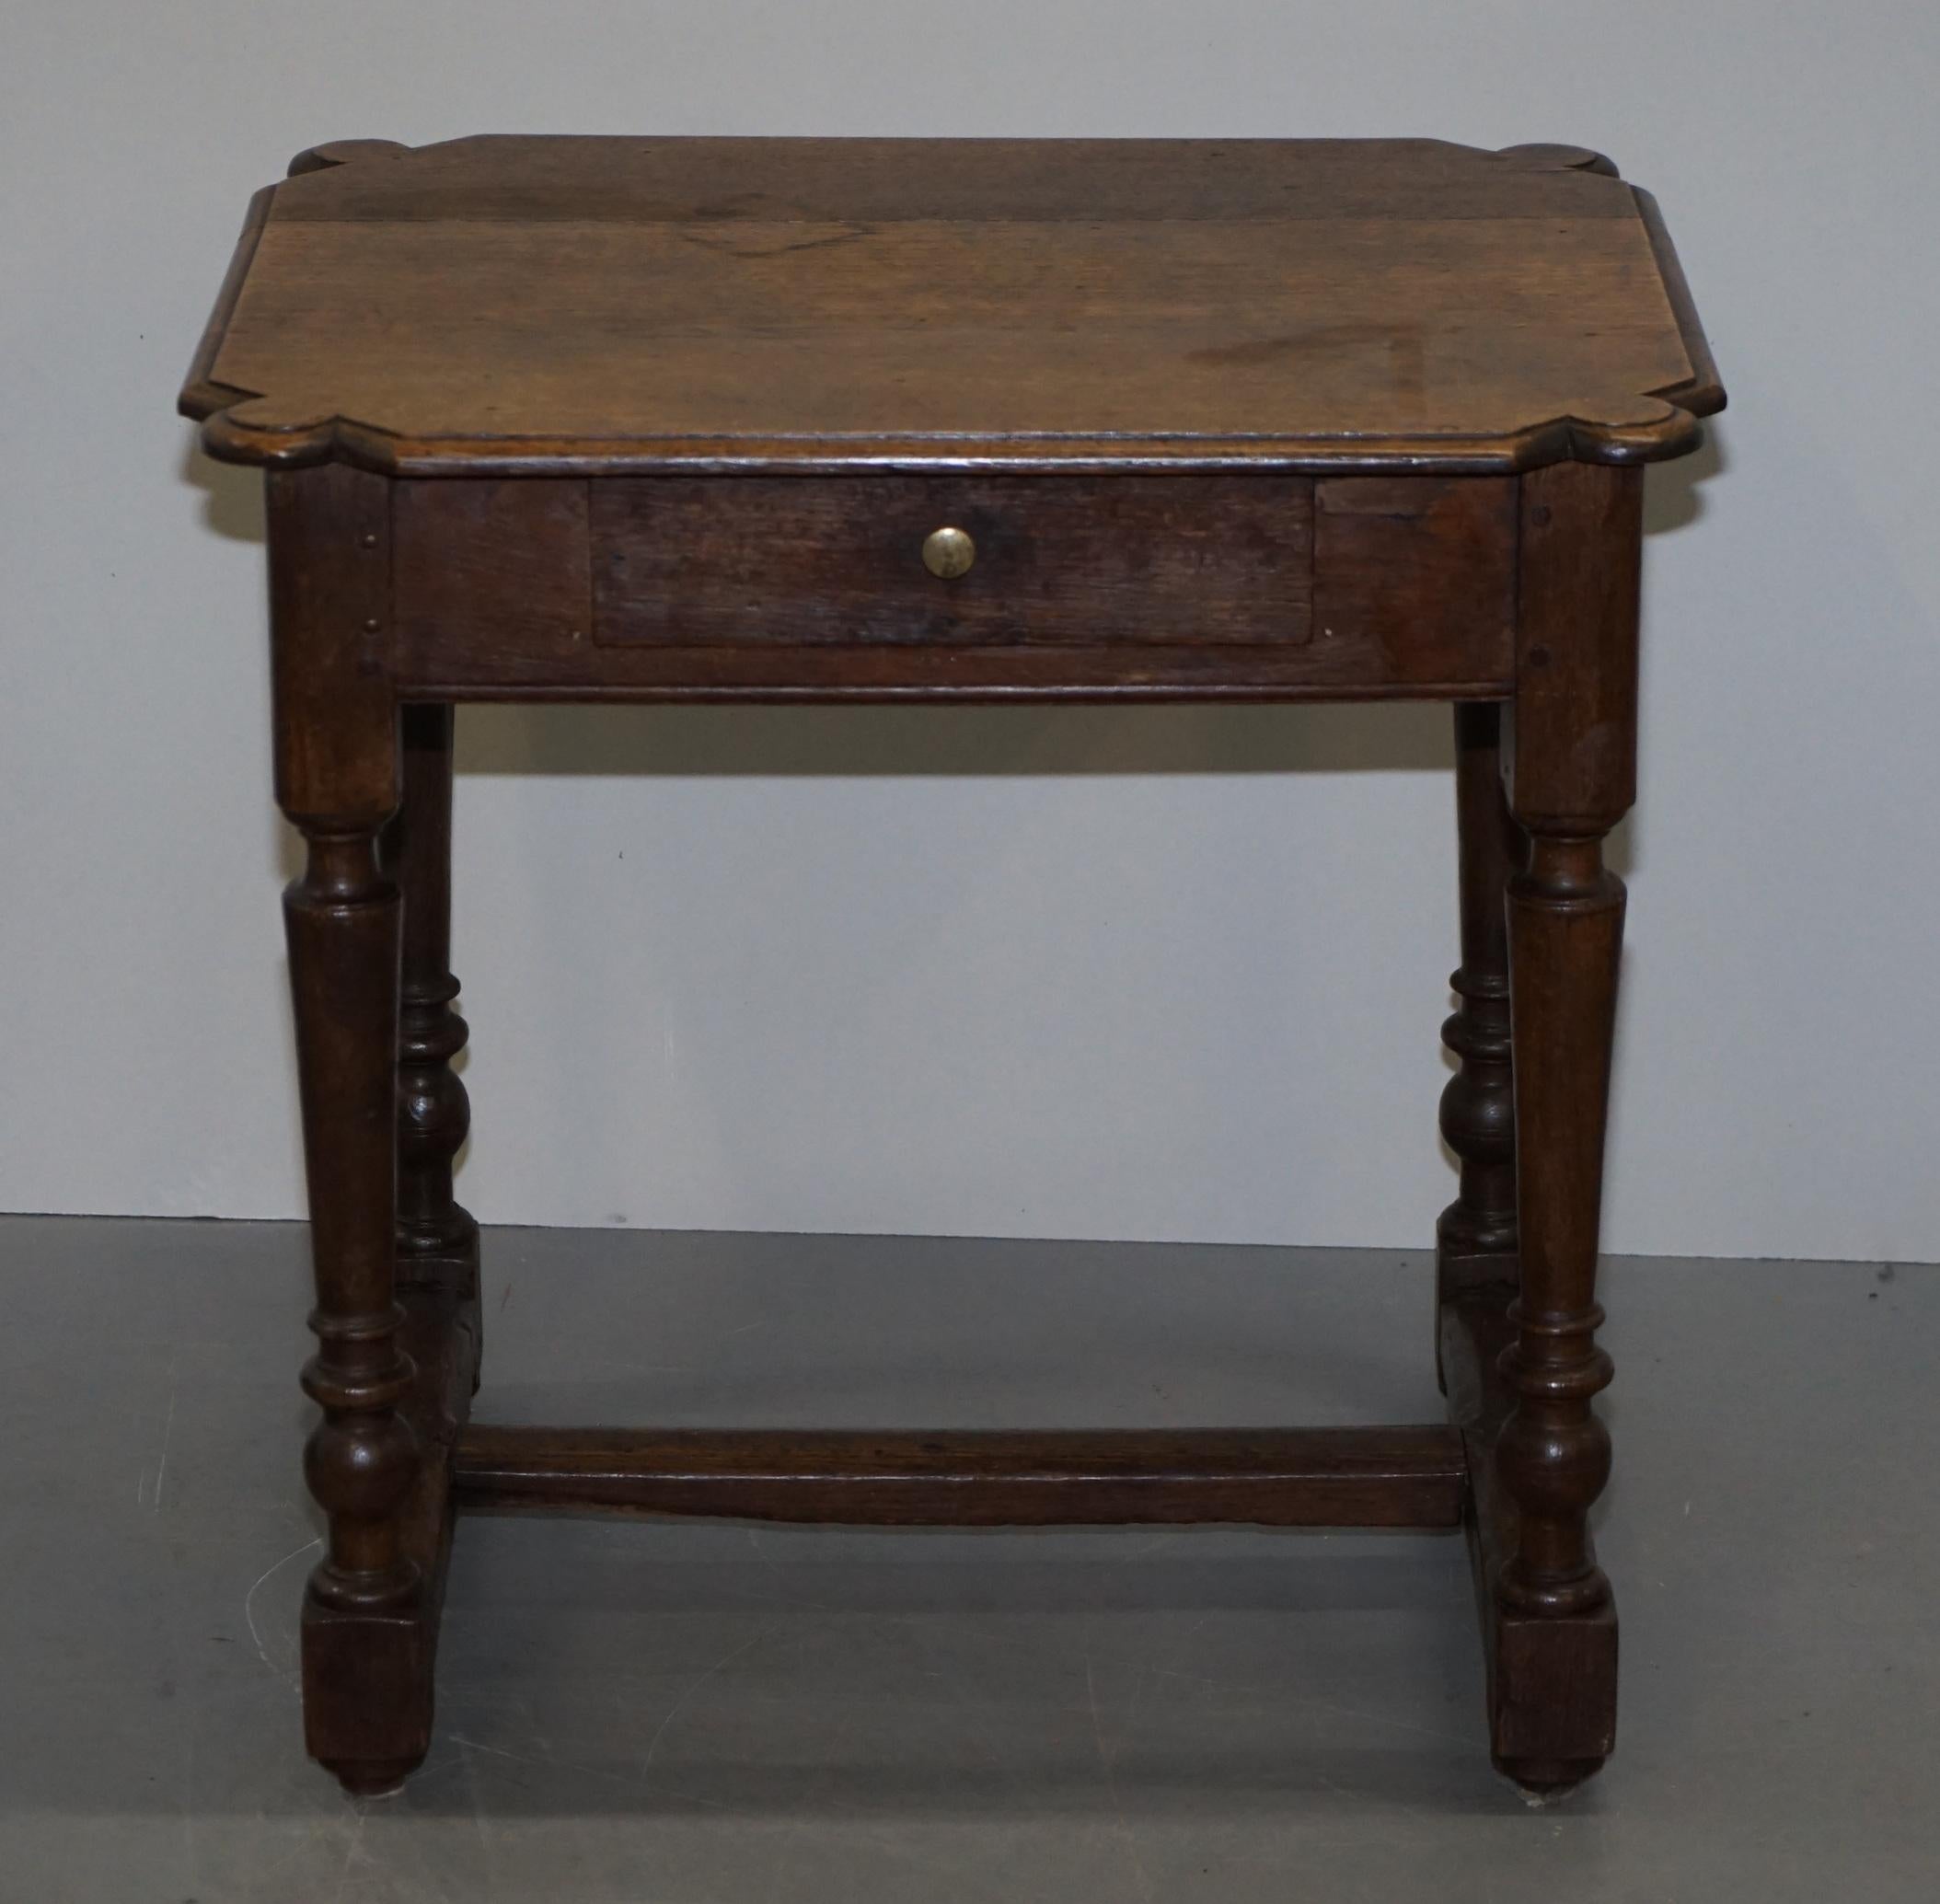 We are delighted to offer for sale this lovely Dutch 18th century occasional side table with single drawer

A good primate mid-18th century table, made in oak, traditionally dowelled all over, the wear and patination is lovely

In terms of the